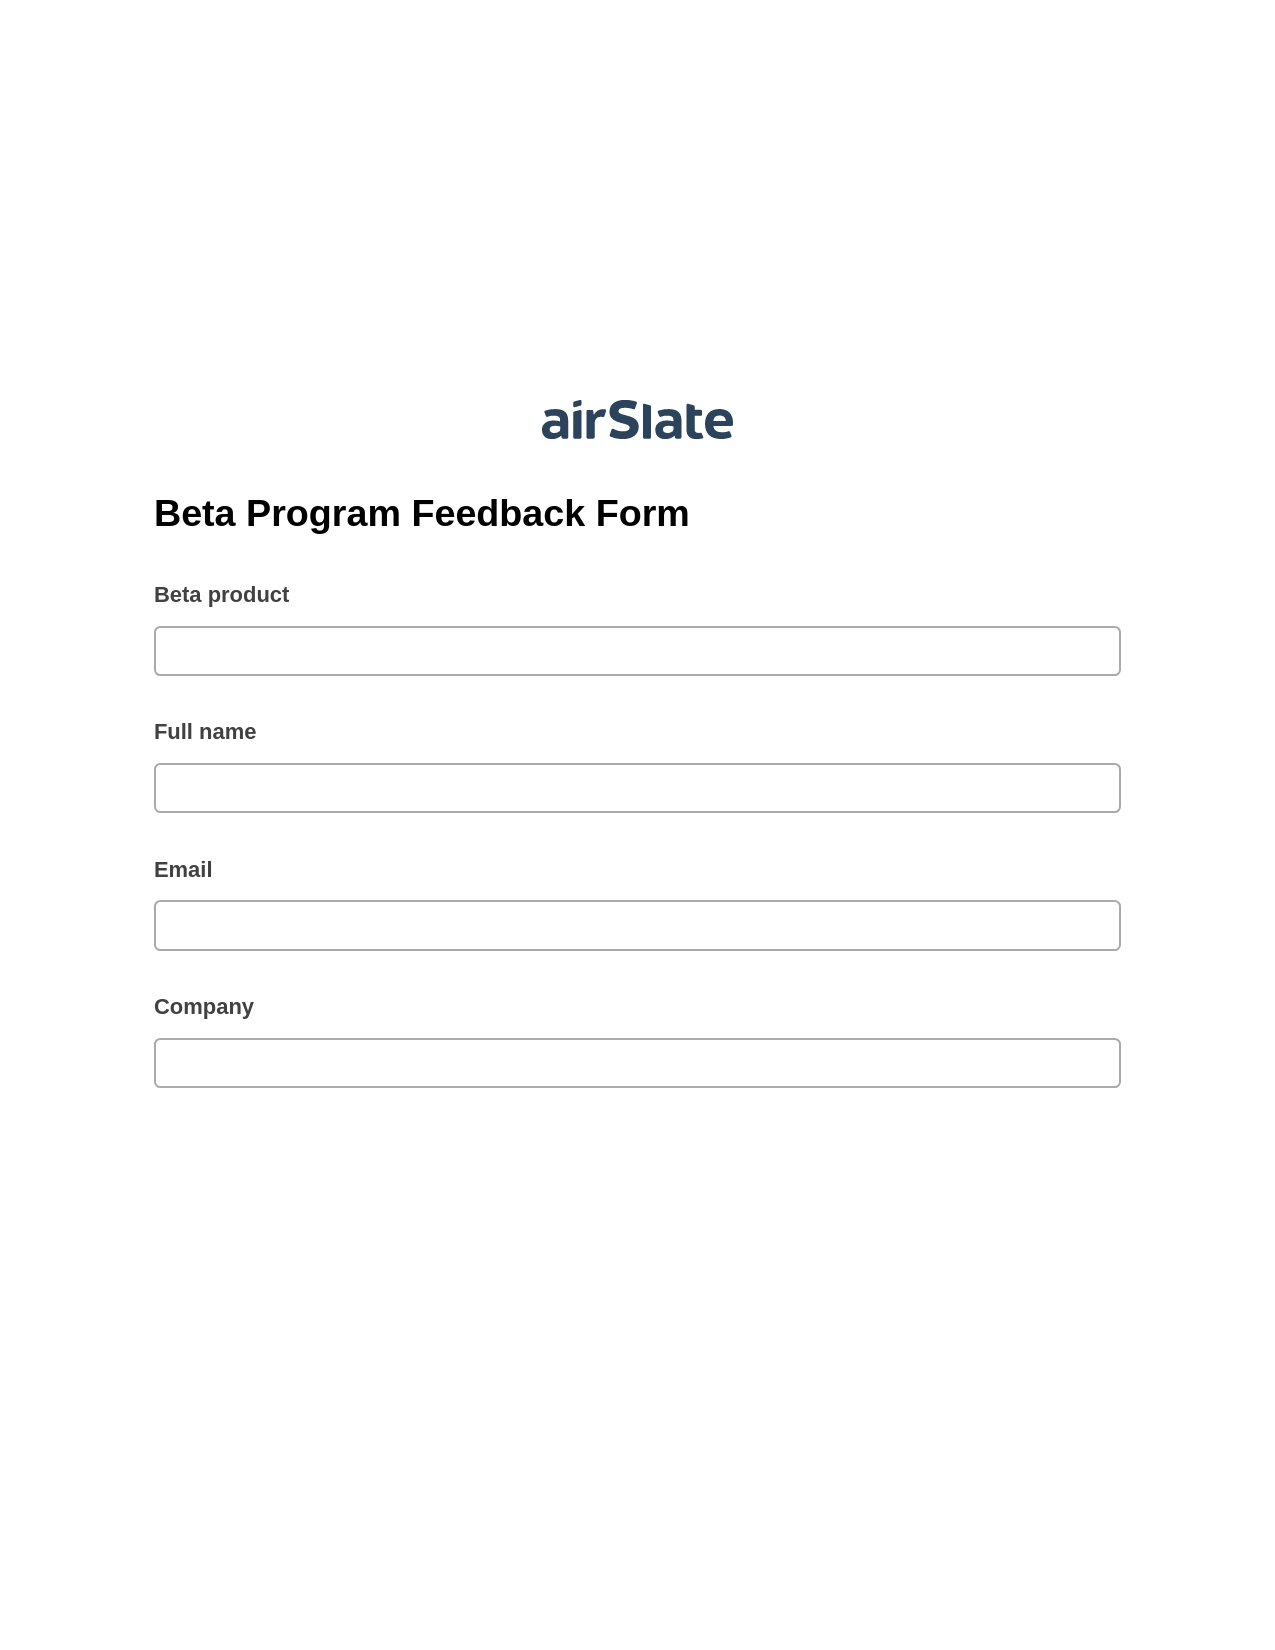 Multirole Beta Program Feedback Form Pre-fill from another Slate Bot, Add Tags to Slate Bot, OneDrive Bot